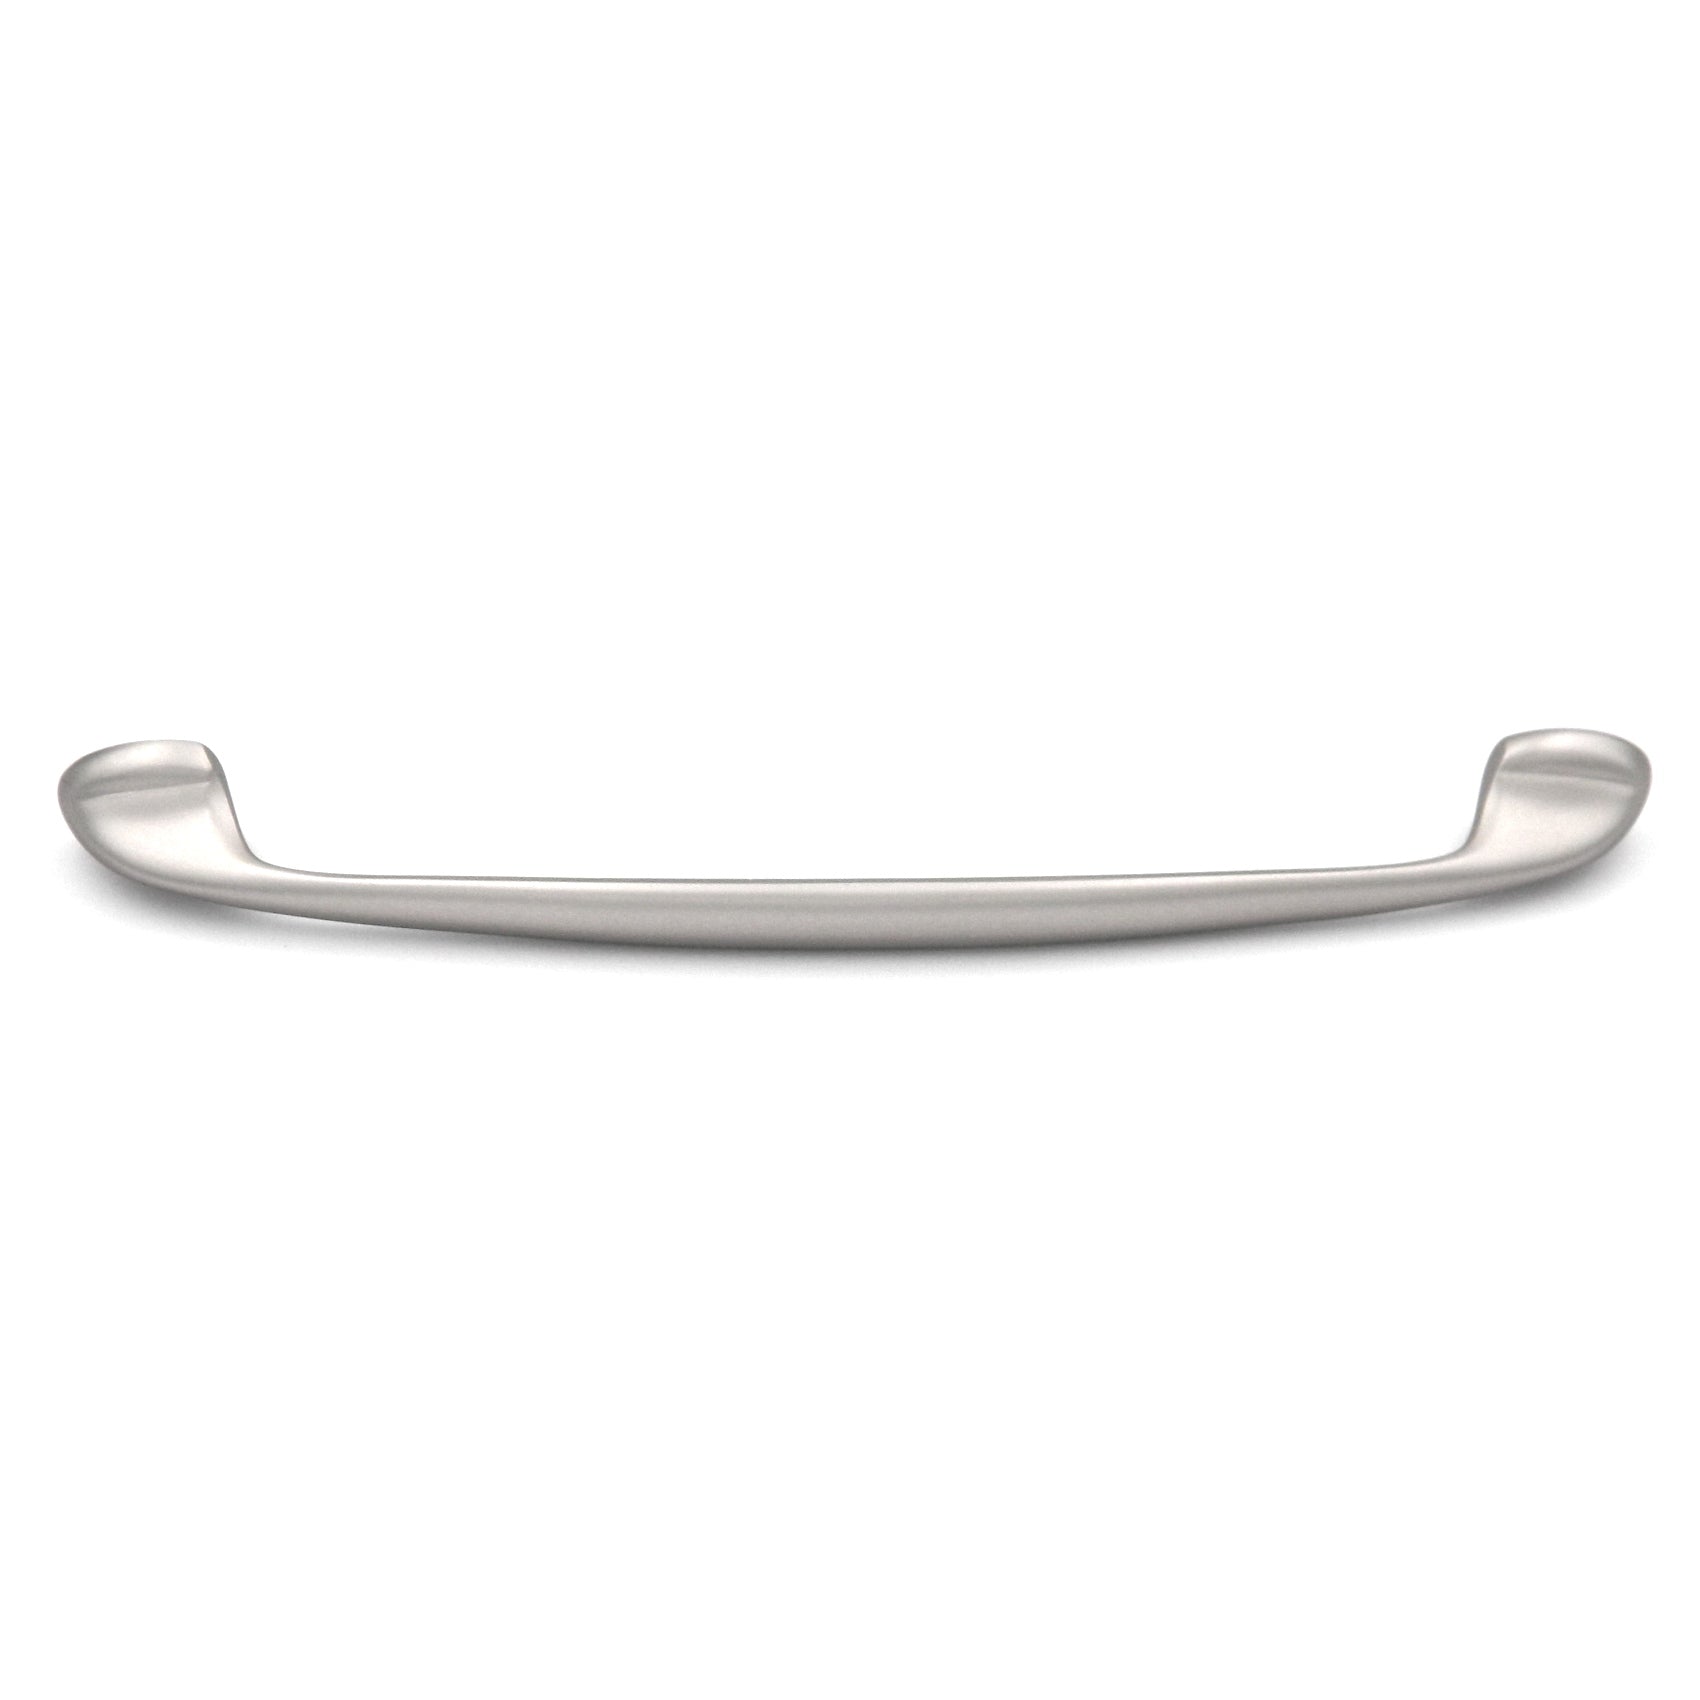 20 Pack Hickory Altair P3080-FN Flat Nickel 6 1/4" (160mm)cc Arch Cabinet Handle Pull